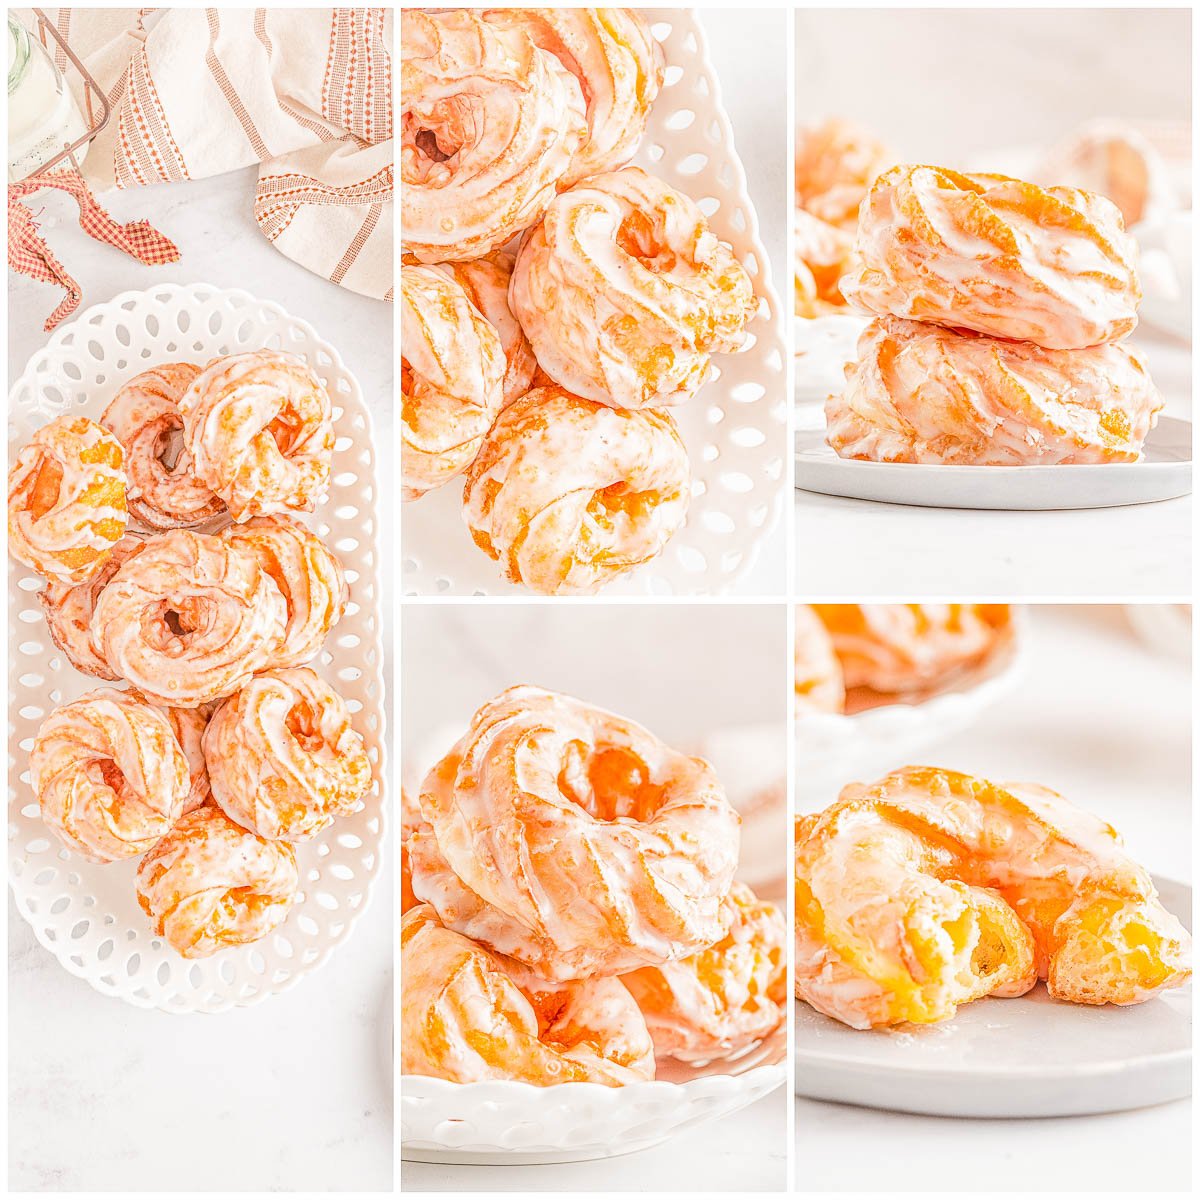 French Crullers (Dunkin' Donuts Copycat Recipe) - Light and airy donuts with a soft and delicate interior, a lightly crisped exterior, and a sweet glaze that melts into every crevice! Learn how to easily make this classic French pastry at home that's BETTER than anything store bought! Move over Dunkin!